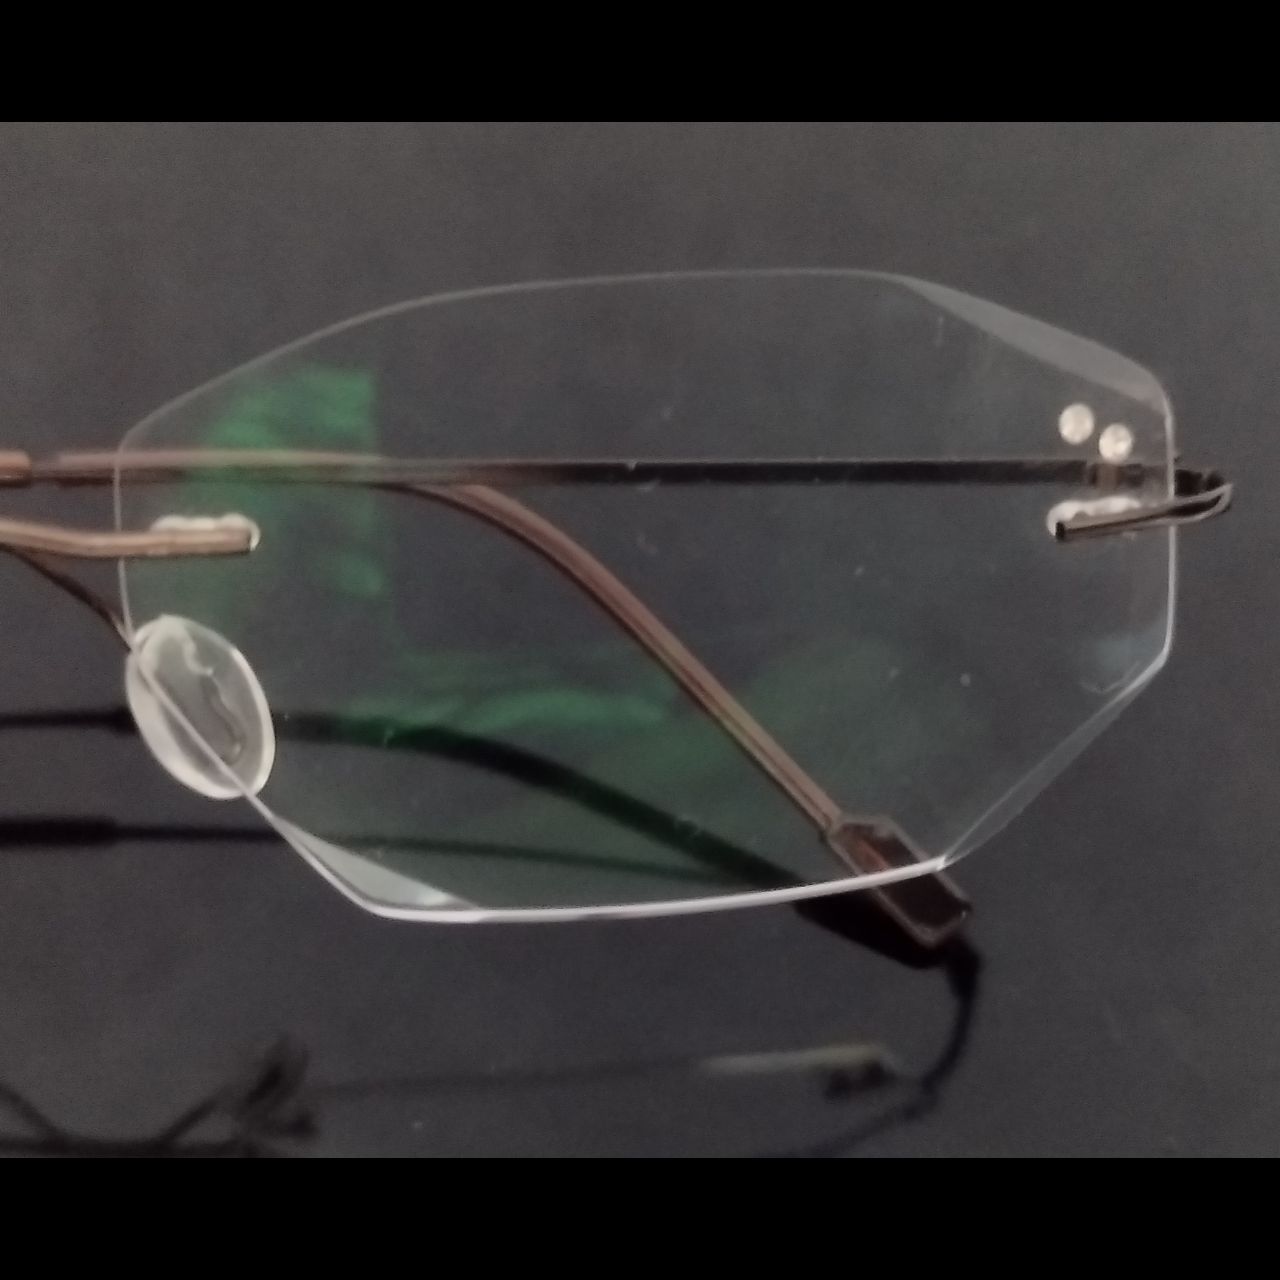 Authority Allure Rimless Glasses for Men and Women